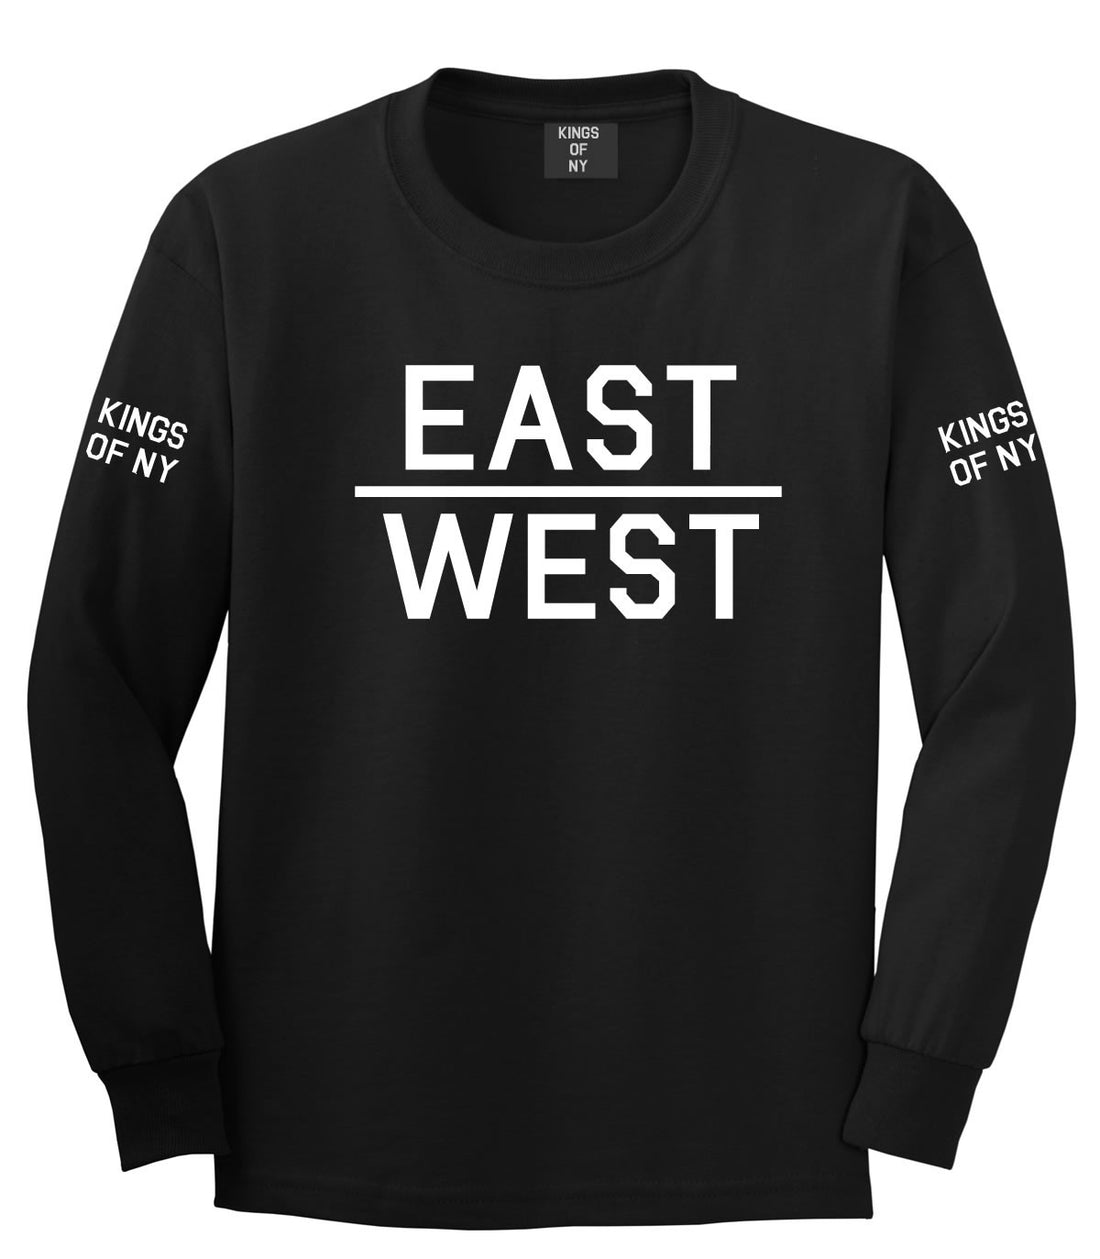 East West Long Sleeve T-Shirt in Black by Kings Of NY